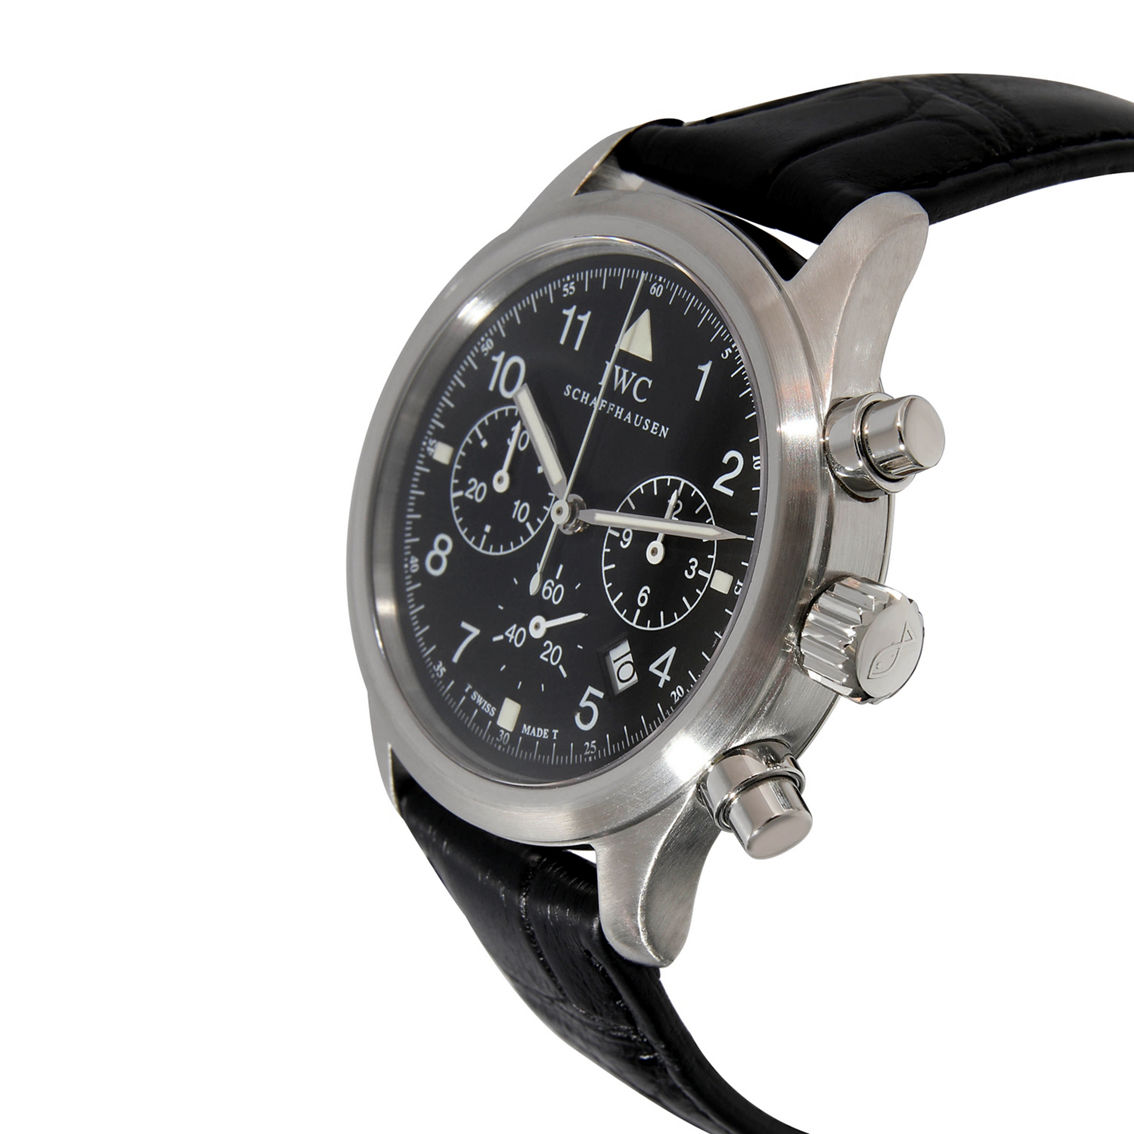 IWC Pilot Chronograph IW374101 Unisex Watch in  Stainless Steel Pre-Owned - Image 2 of 2